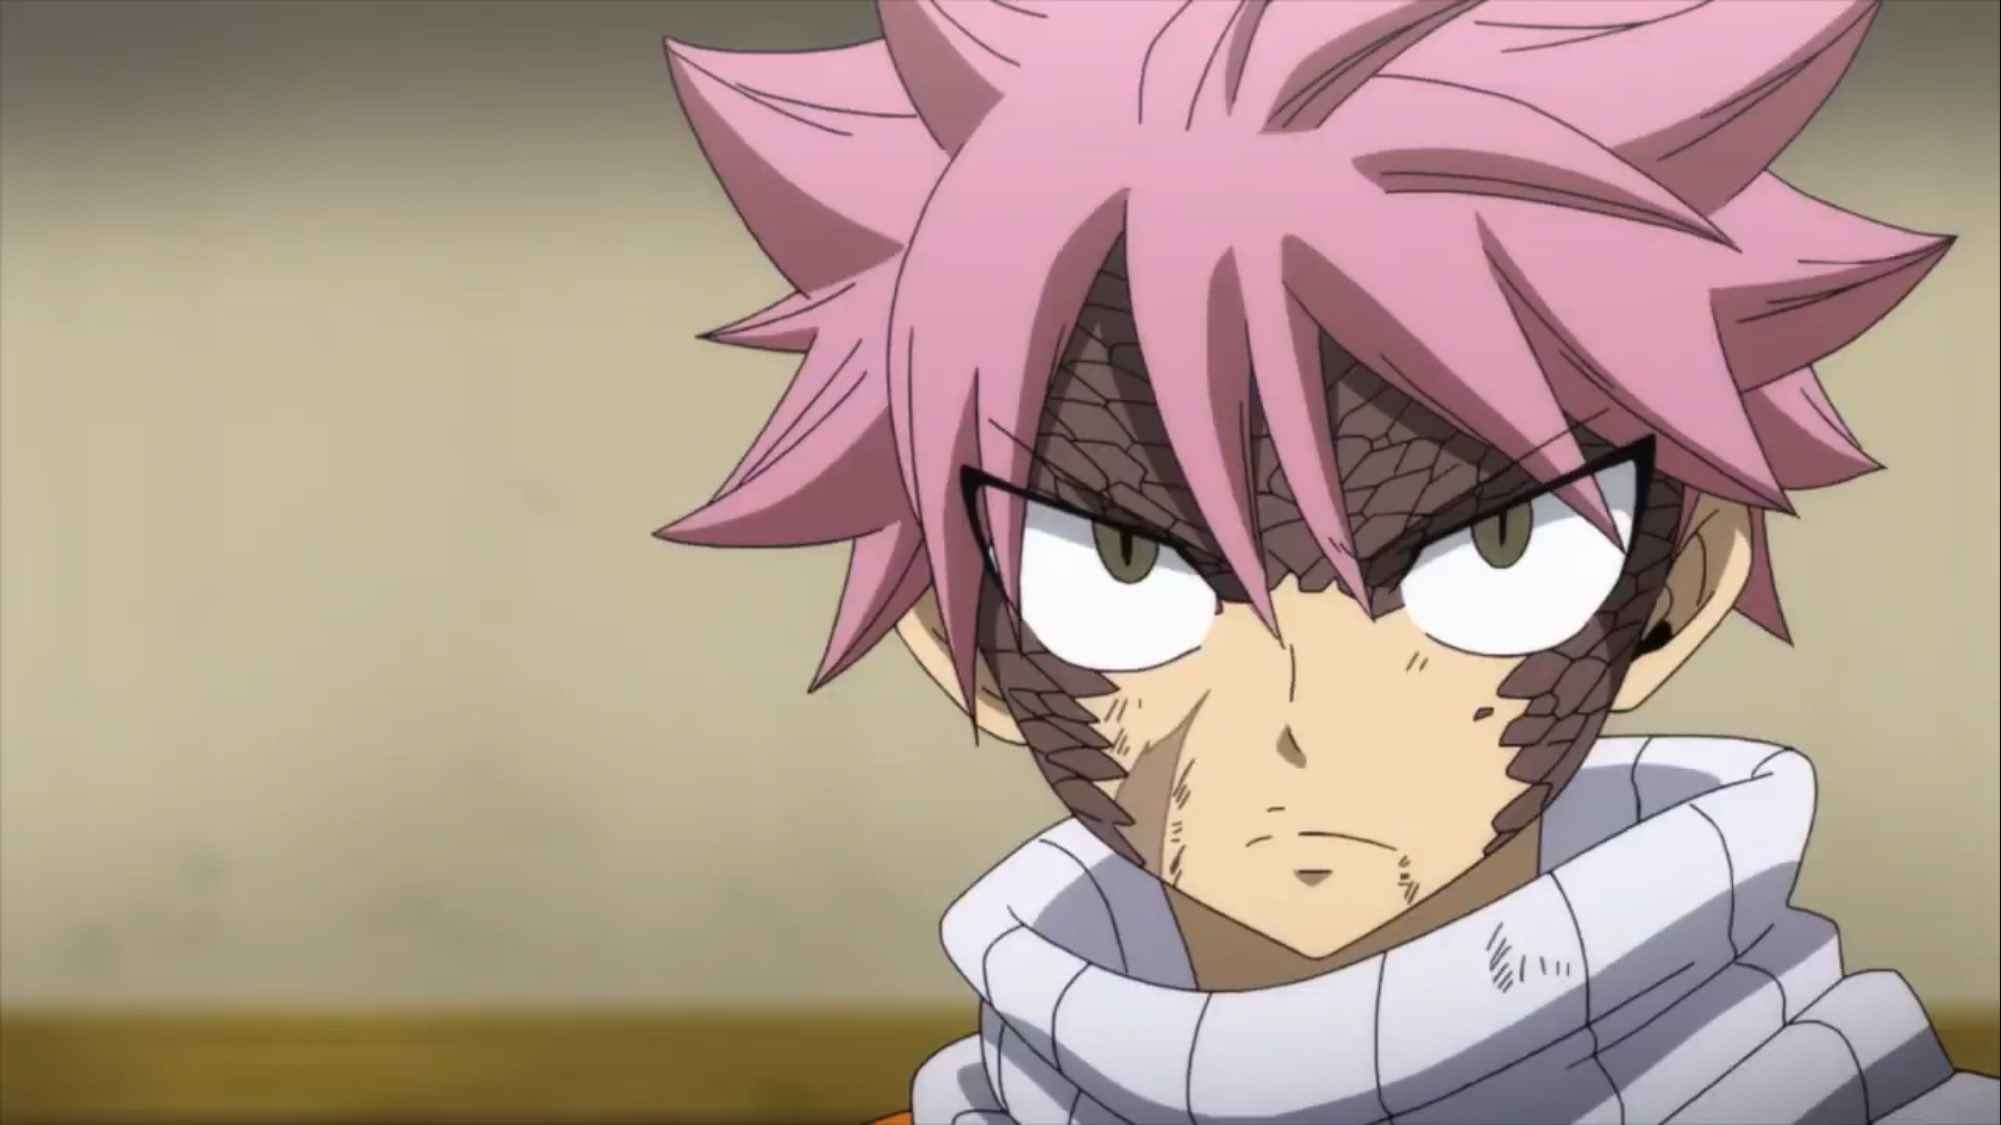 Can Natsu willingly use DragonForce ?